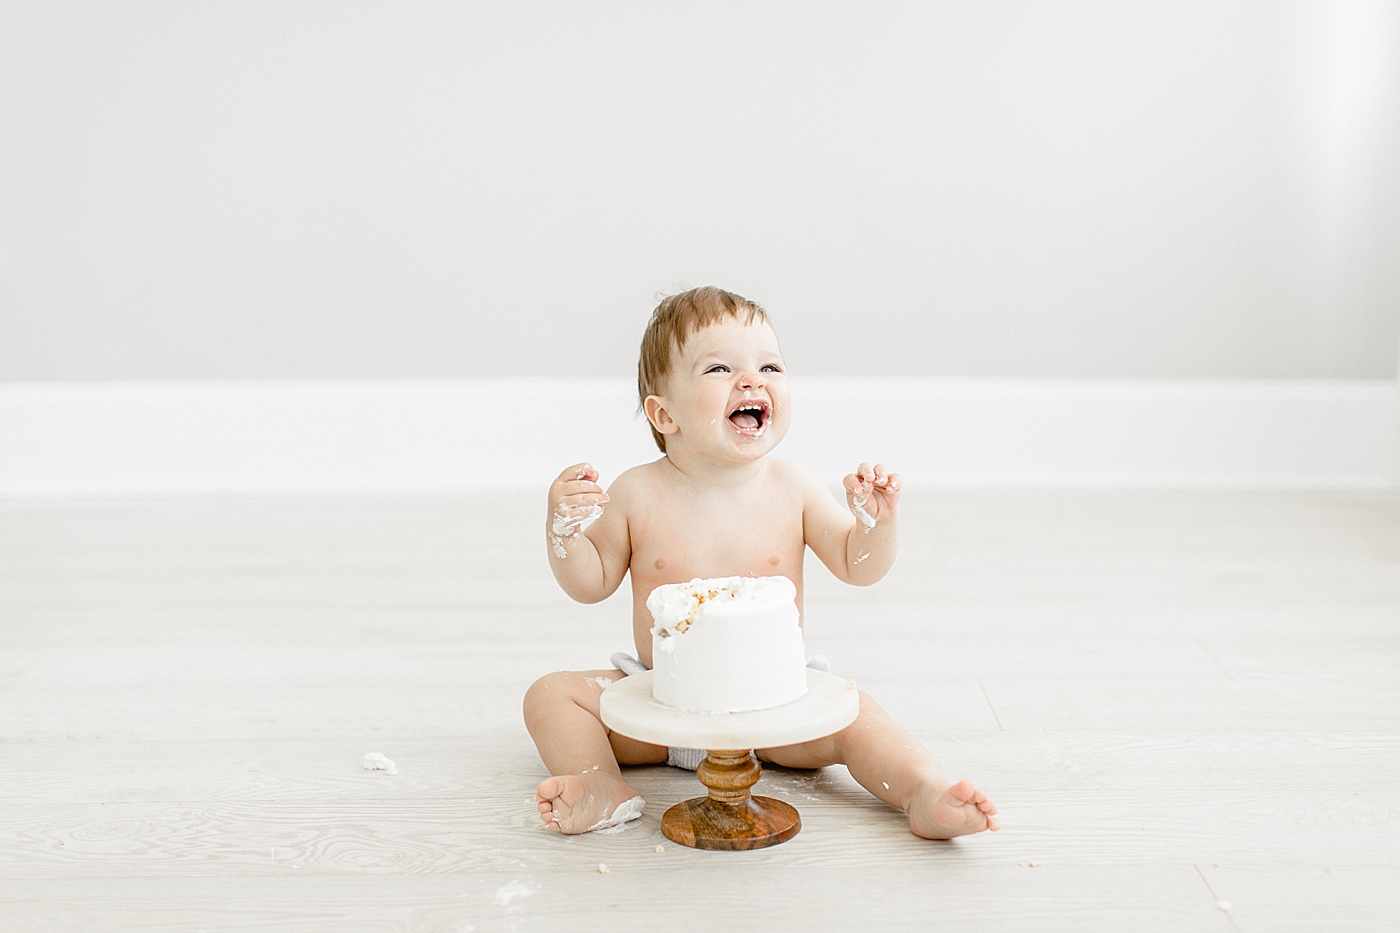 One year old cake smash in Tampa photography studio. Photo by Brittany Elise Photography.